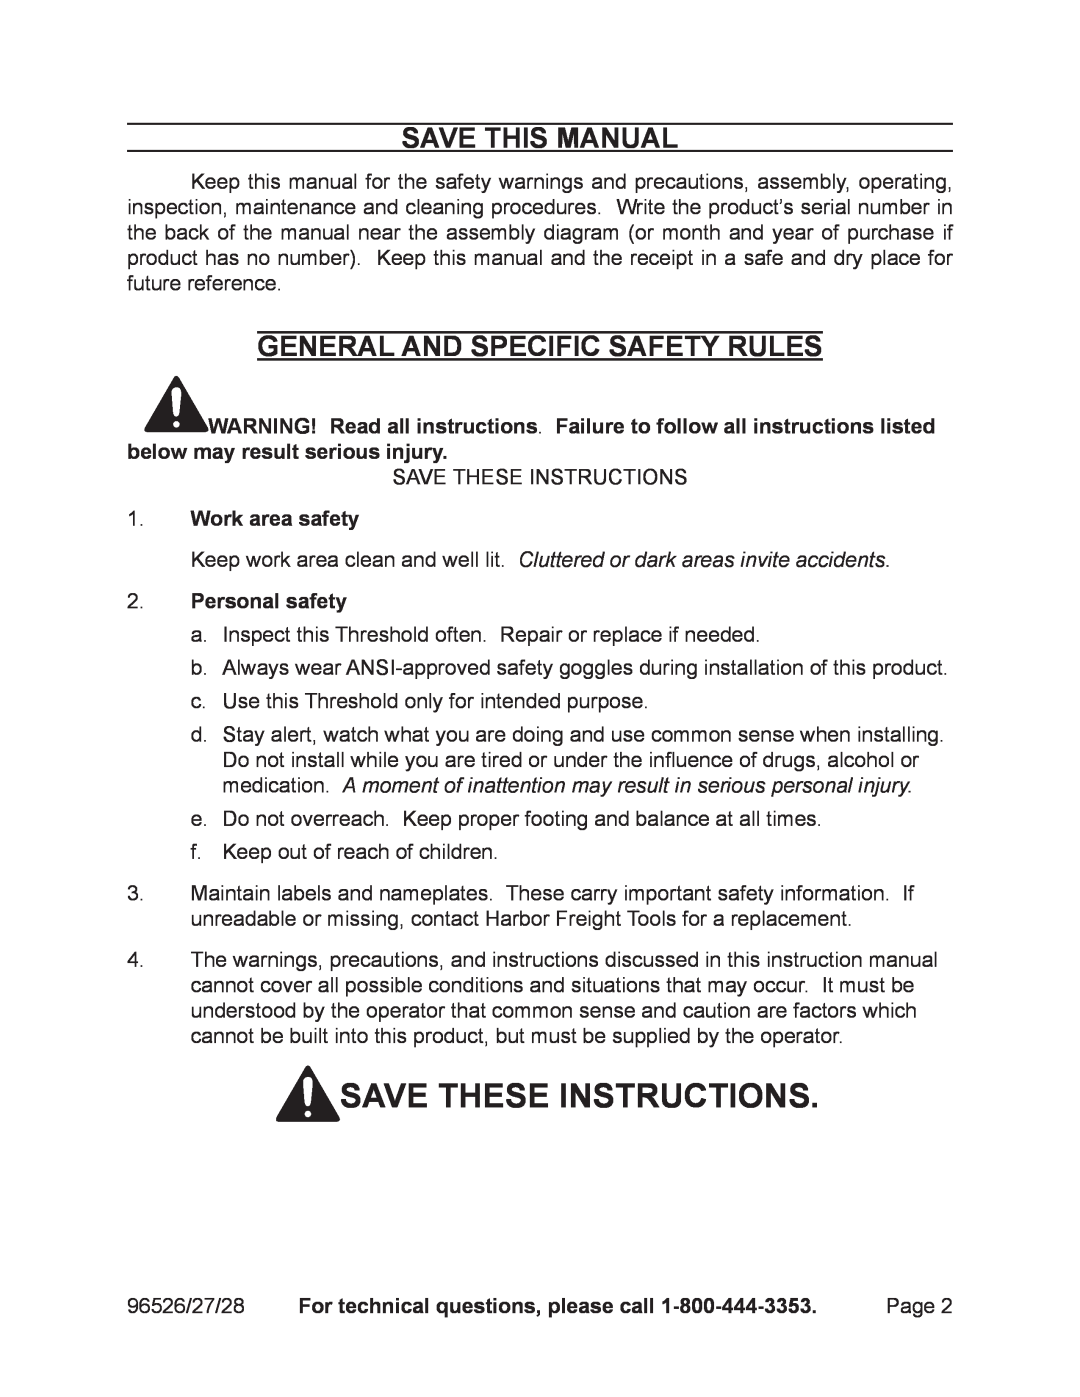 Harbor Freight Tools 96328 Save these instructions, Save This Manual, General and specific Safety Rules, Work area safety 